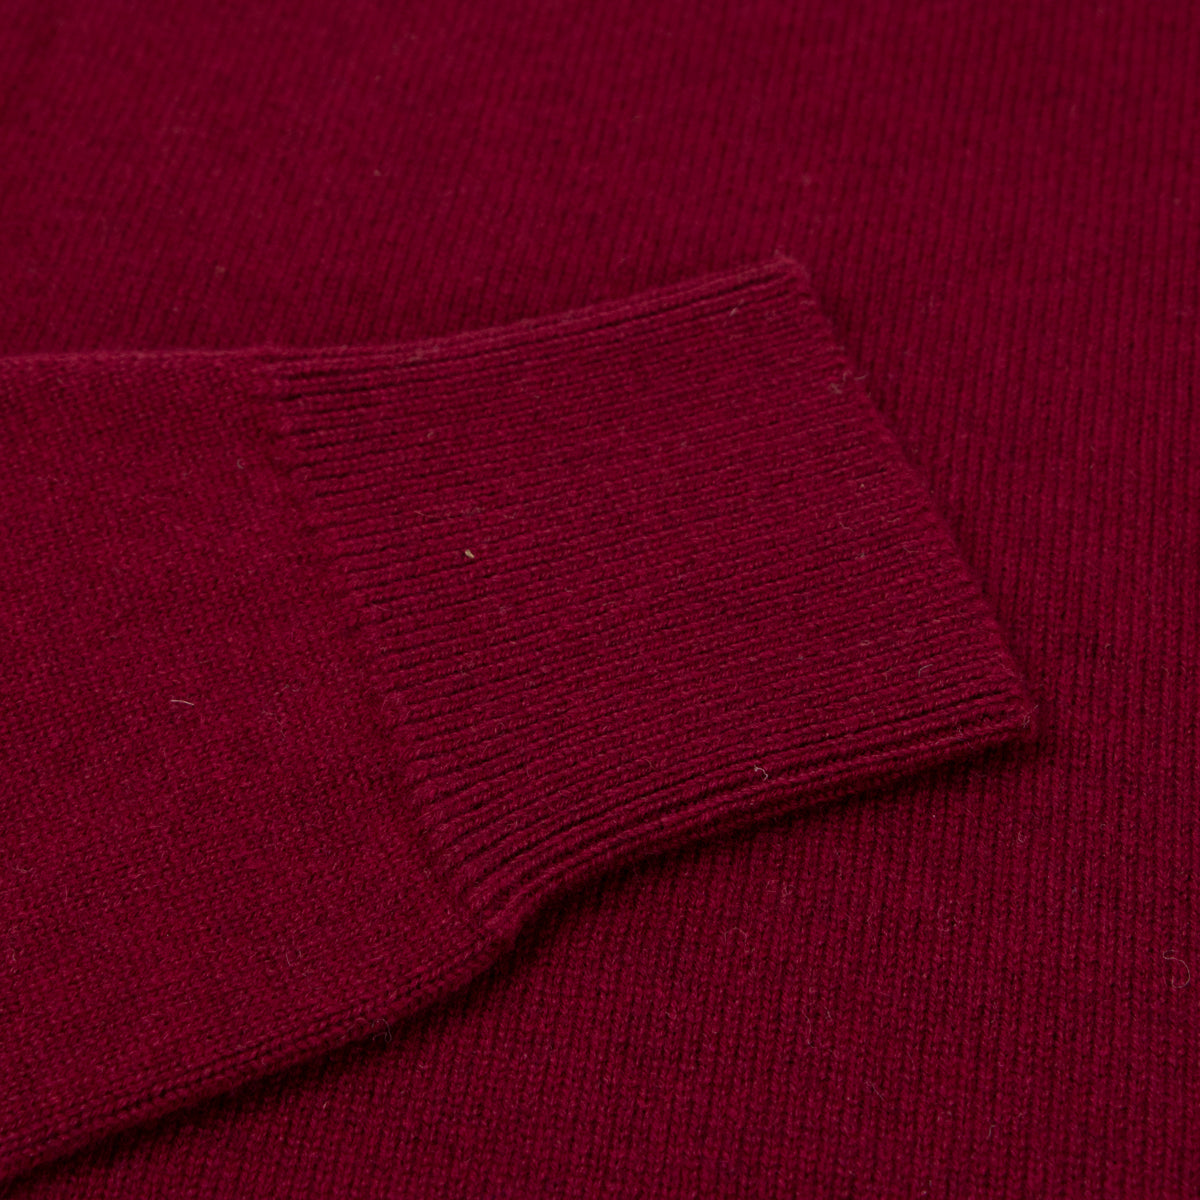 Claret Red Tiree 4ply Crew Neck Cashmere Sweater  Robert Old   